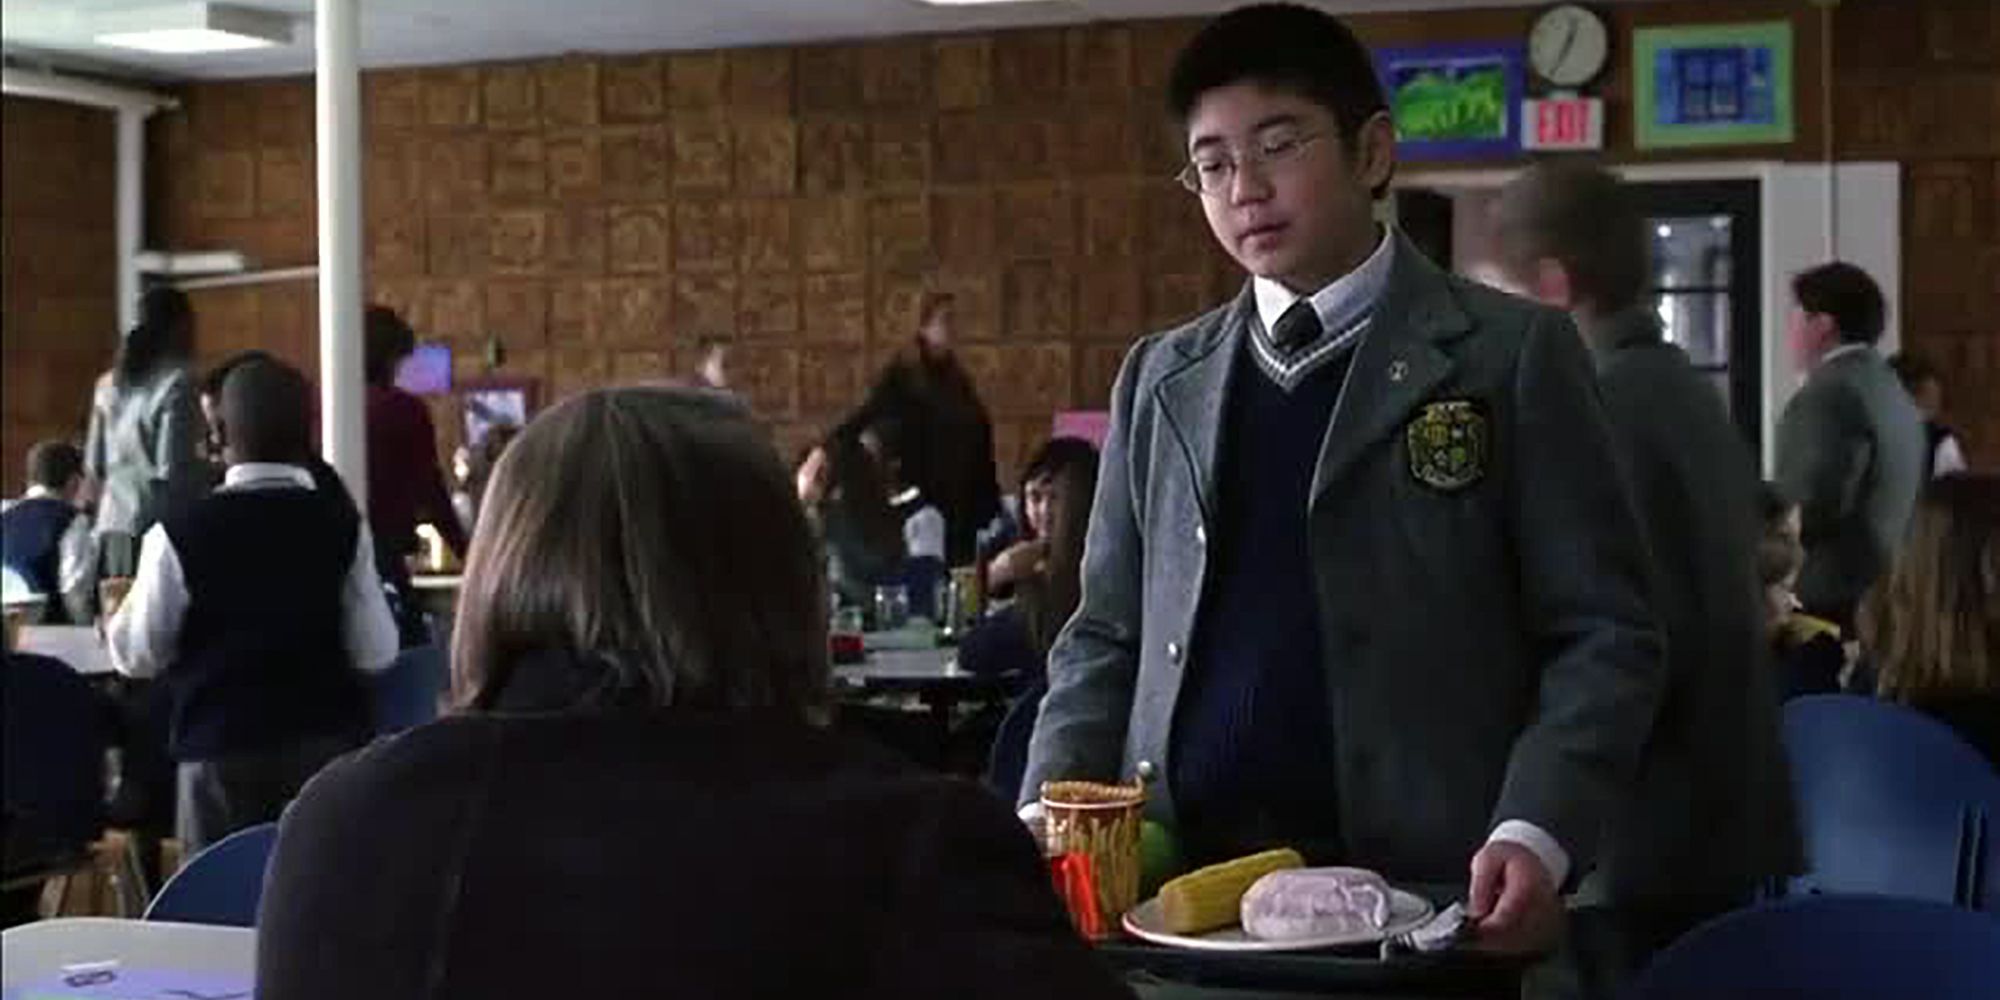 Robert Tsai played a keyboardist in "School of Rock" before leaving movies and pursuing a musical career